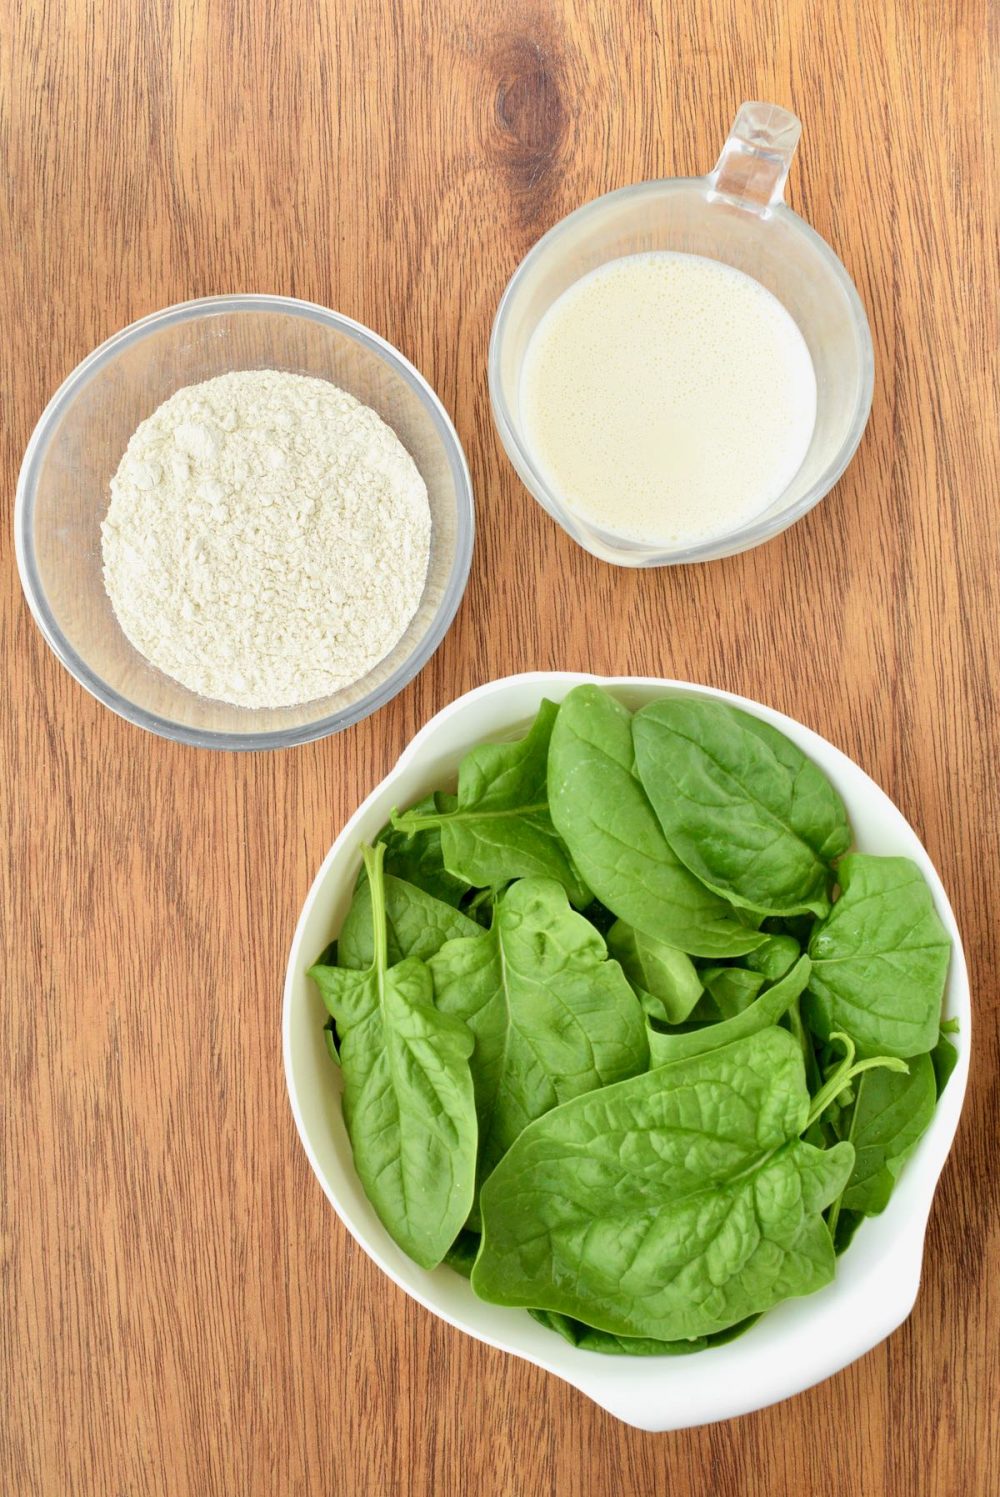 A bowl of flour, jug of soy milk and a bowl of spinach on a wooden board 